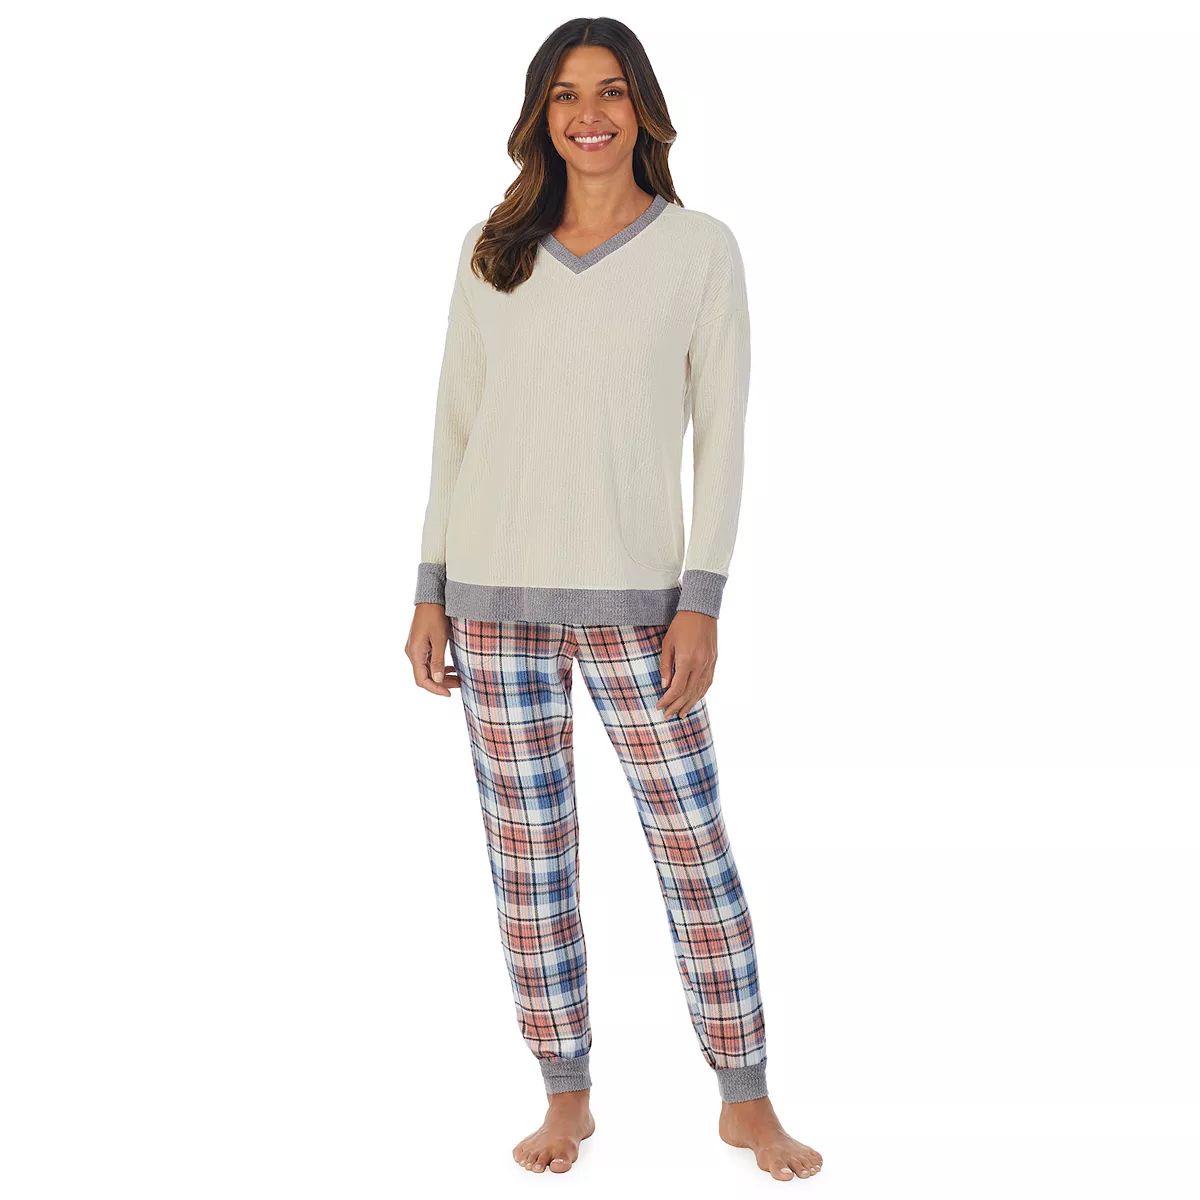 Women's Cuddl Duds® Sweater Knit V-Neck Pajama Top and Banded Bottom Pajama Pants | Kohl's